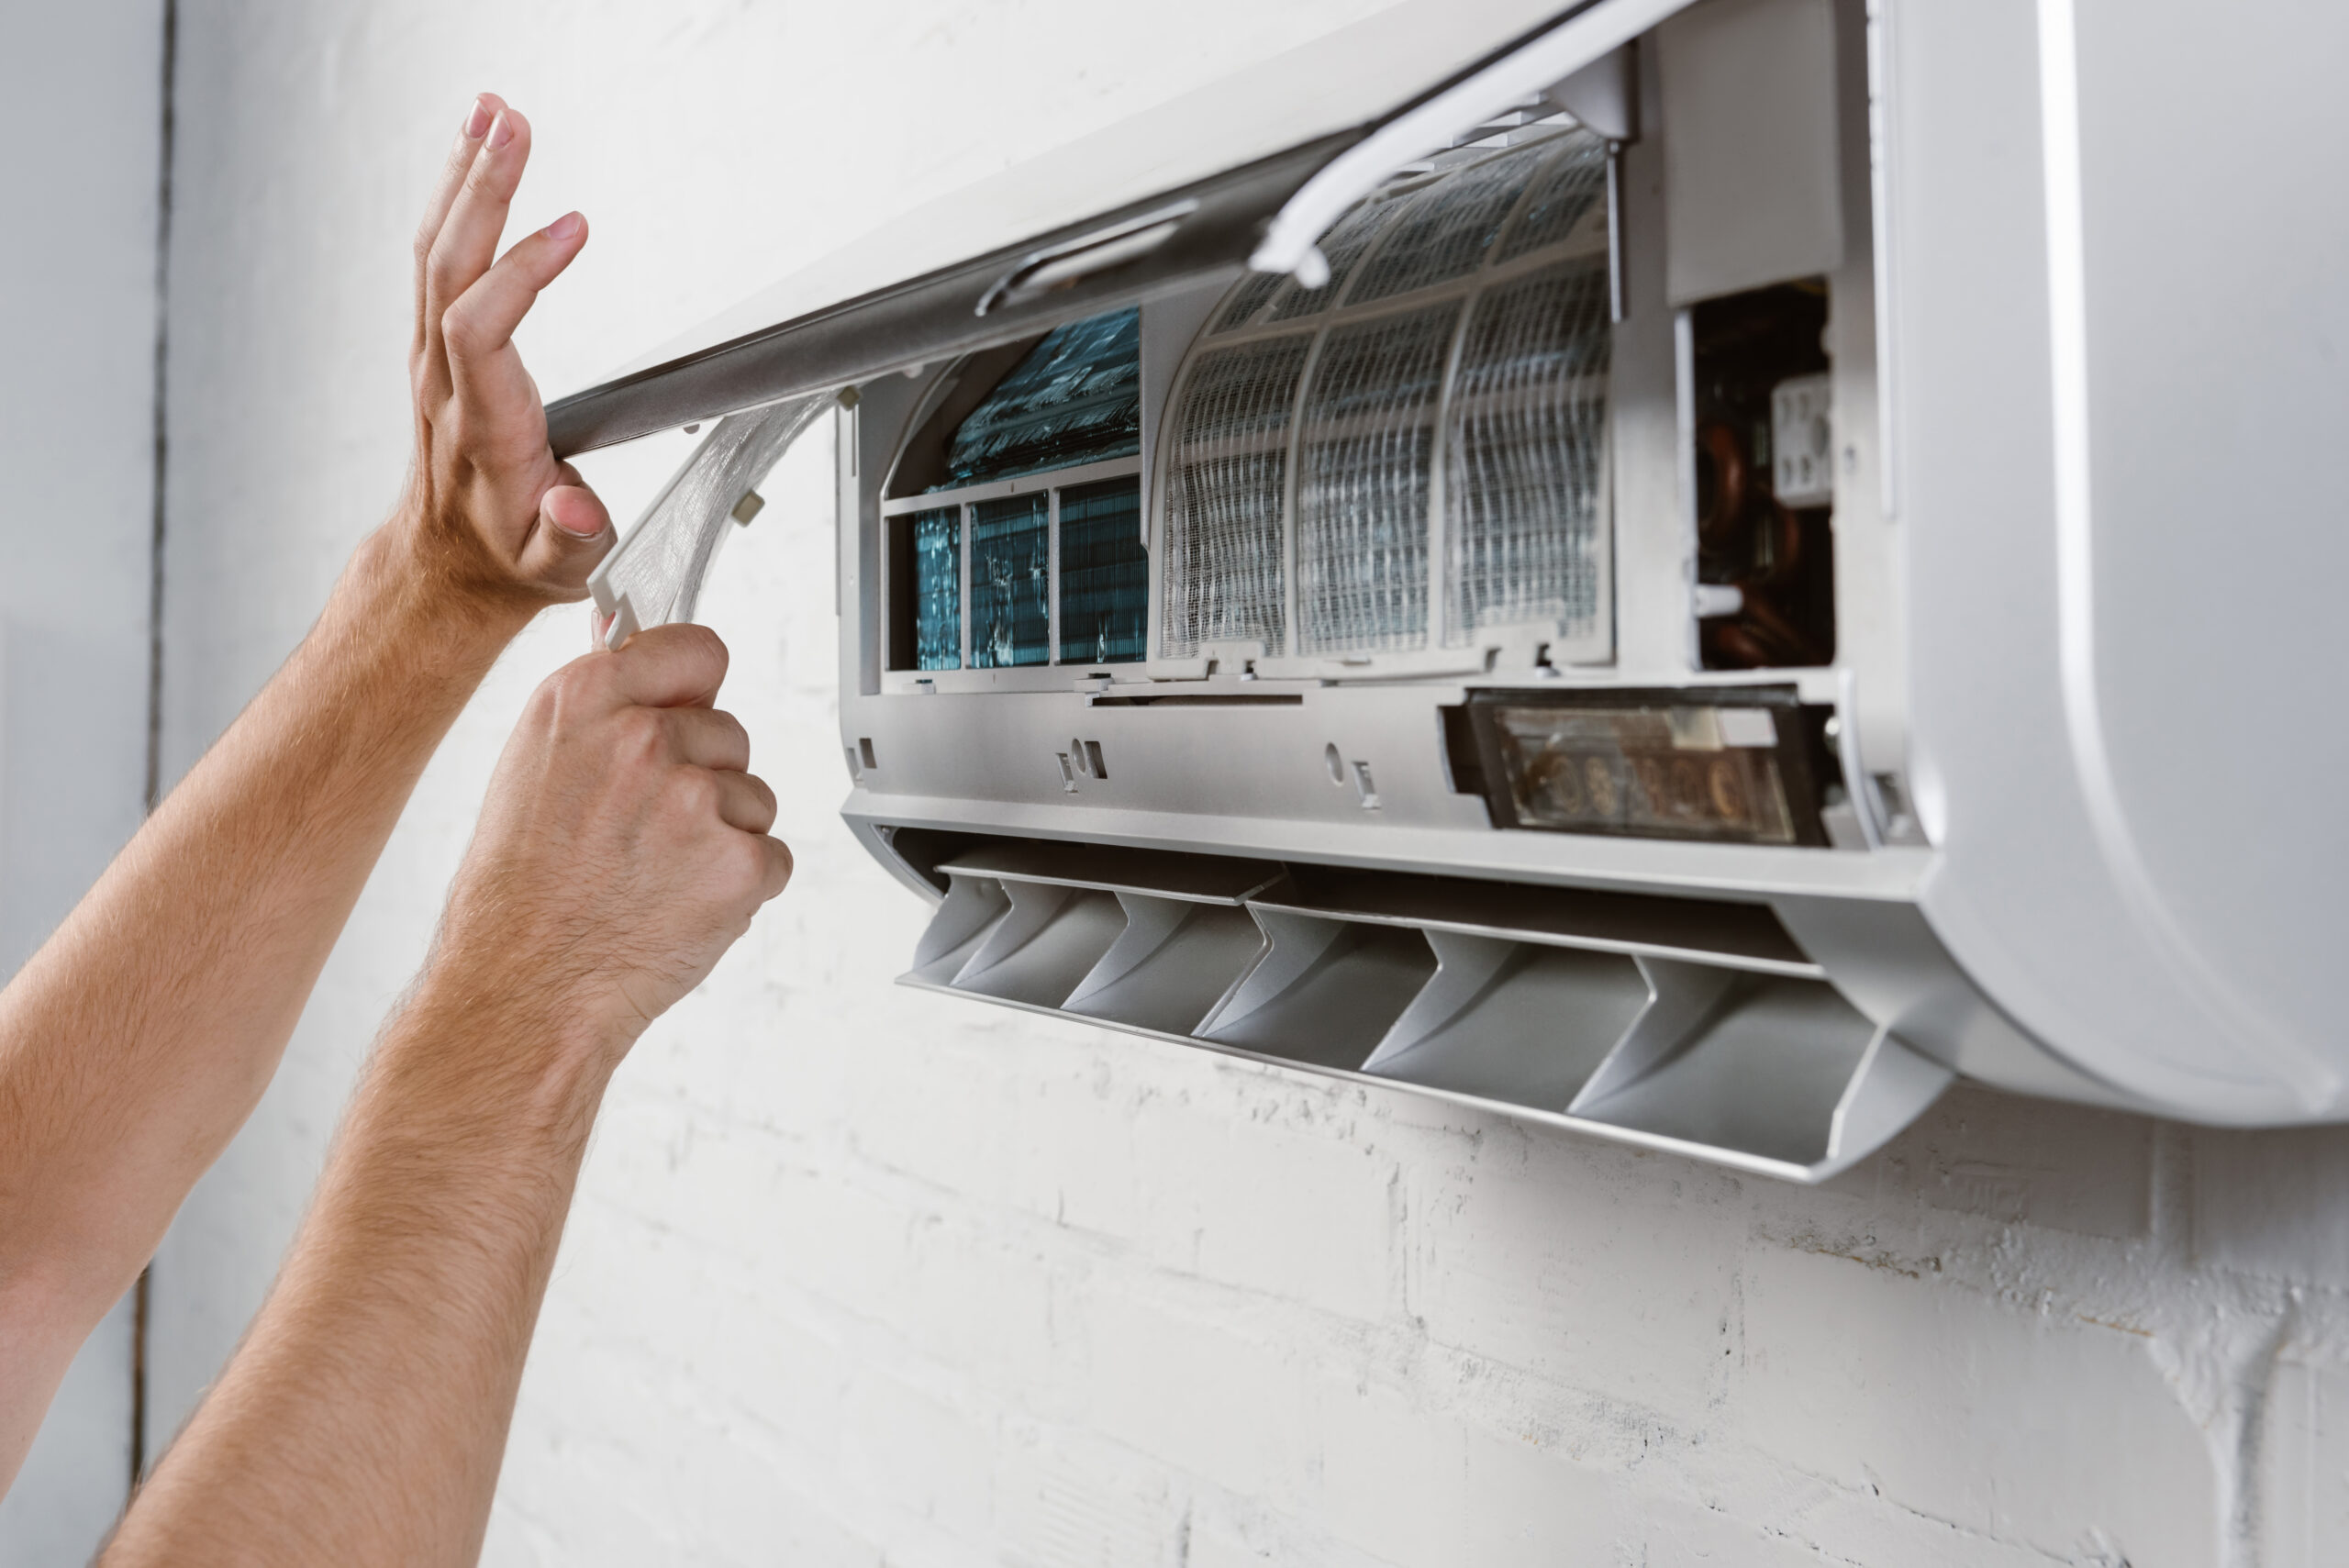 HOW TO MAXIMIZE THE ENERGY EFFICIENCY OF YOUR AIR CONDITIONER